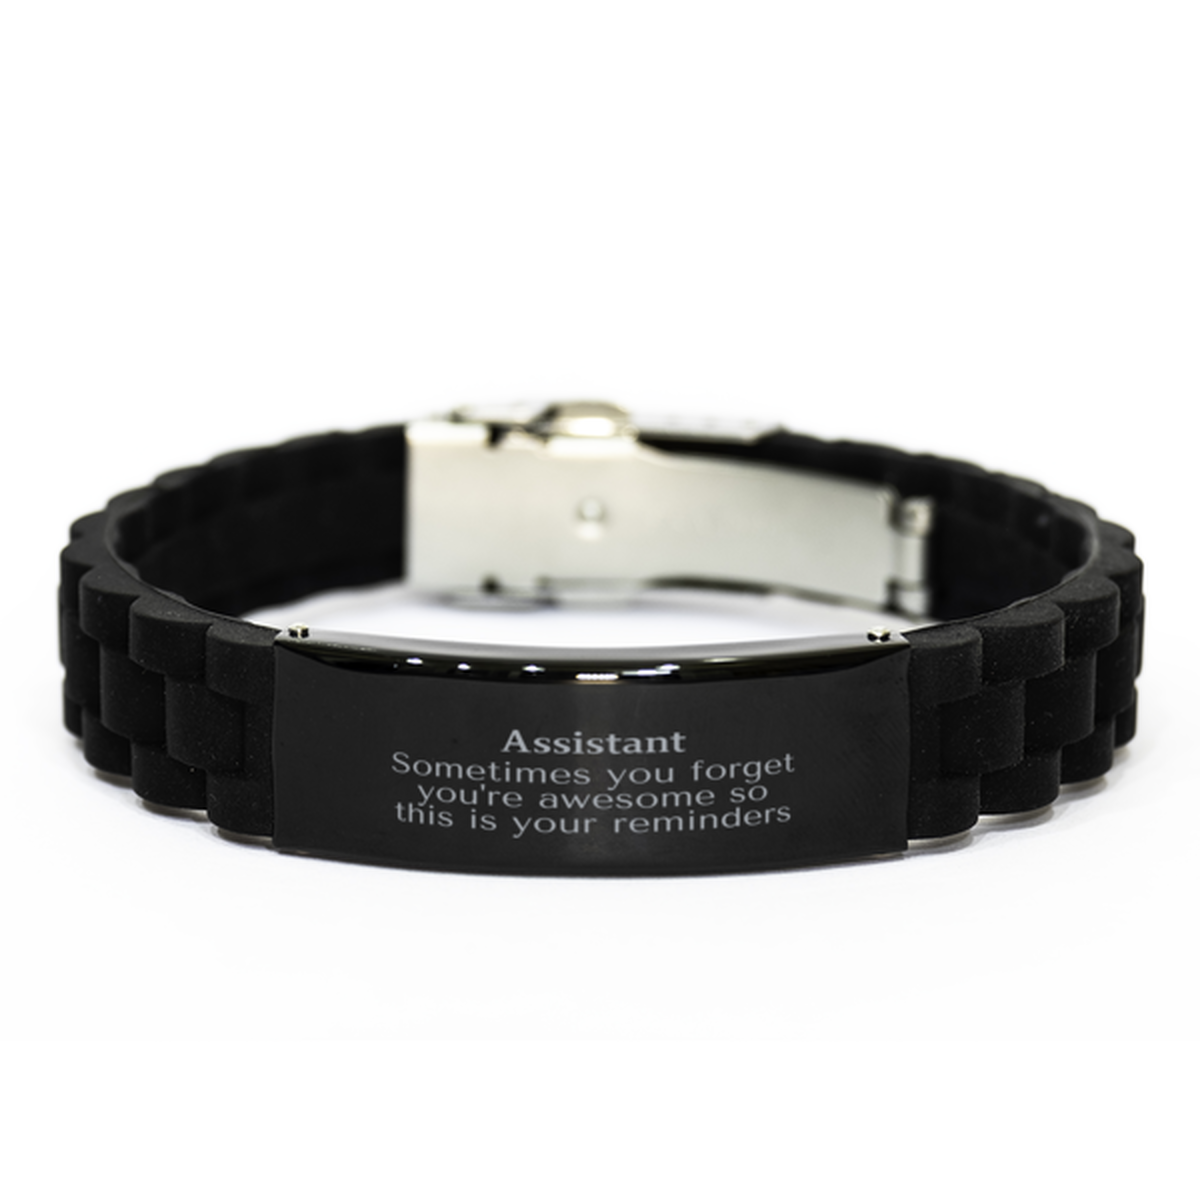 Sentimental Assistant Black Glidelock Clasp Bracelet, Assistant Sometimes you forget you're awesome so this is your reminders, Graduation Christmas Birthday Gifts for Assistant, Men, Women, Coworkers